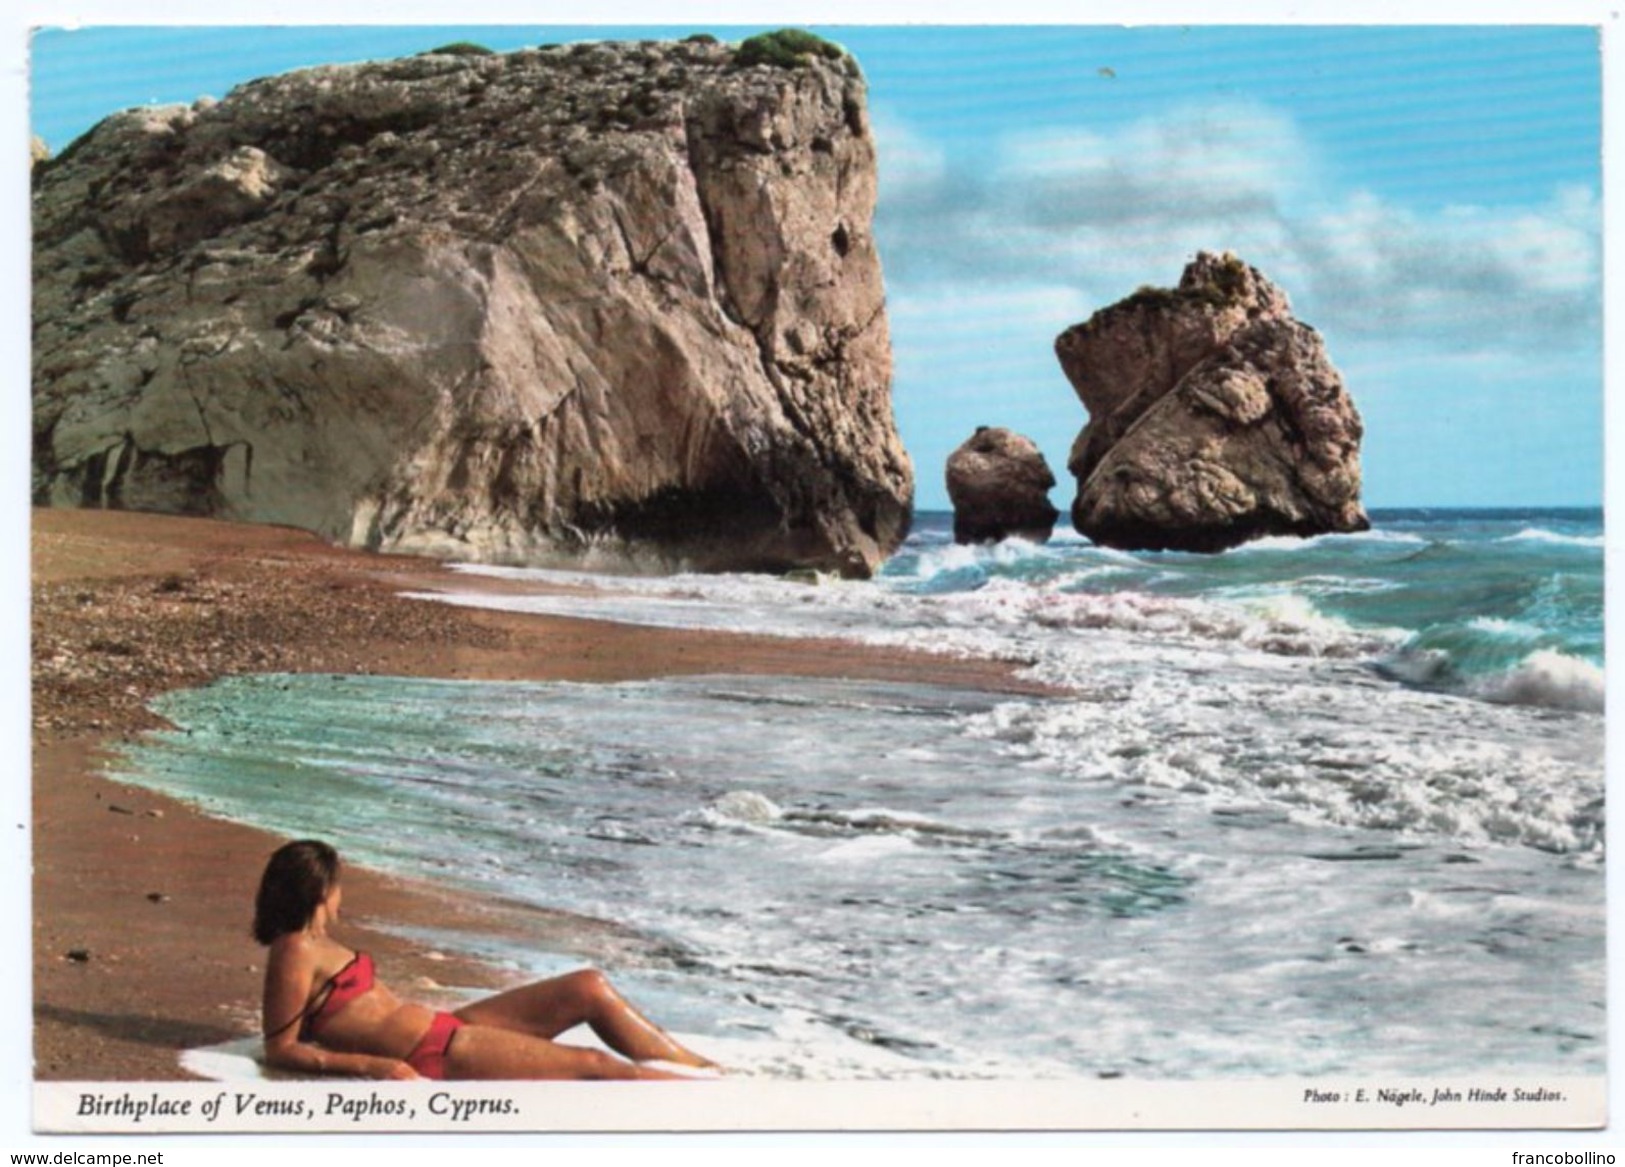 CYPRUS - BIRTHPLACE OF VENUS, PAPHOS (PUBL. JOHN HINDE) / GIRL ON THE BEACH - Cipro